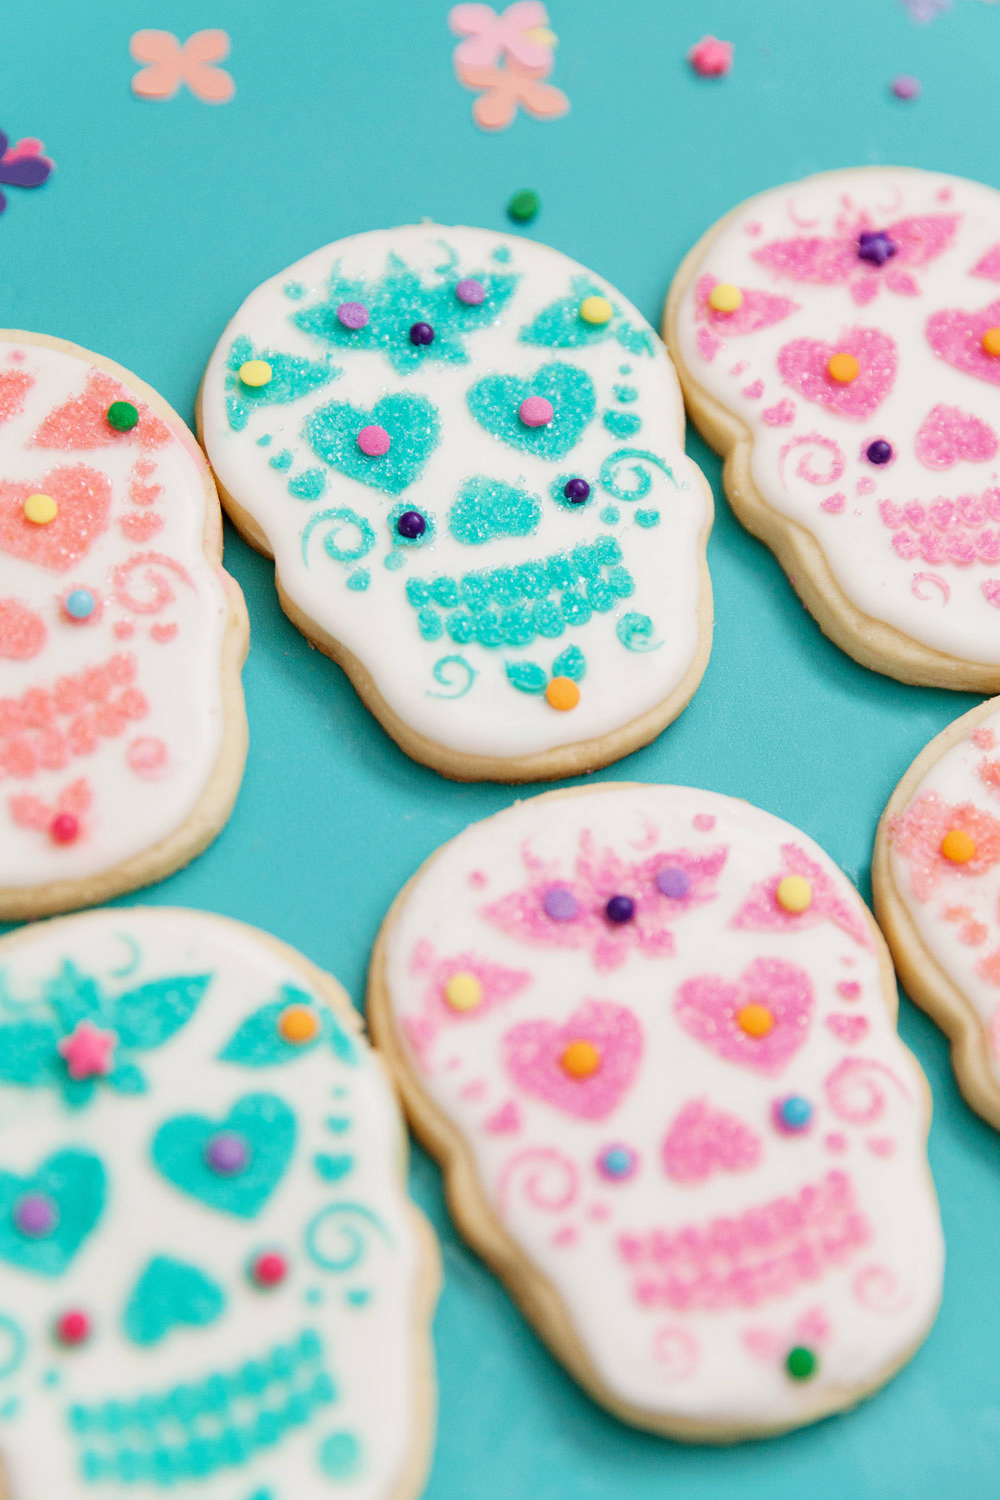 DIY sugar skull cookies in honor of Dia de los Muertos! Learn this new fun cookie decorating technique that is so simple ANYONE can do it. No decorating skills necessary.